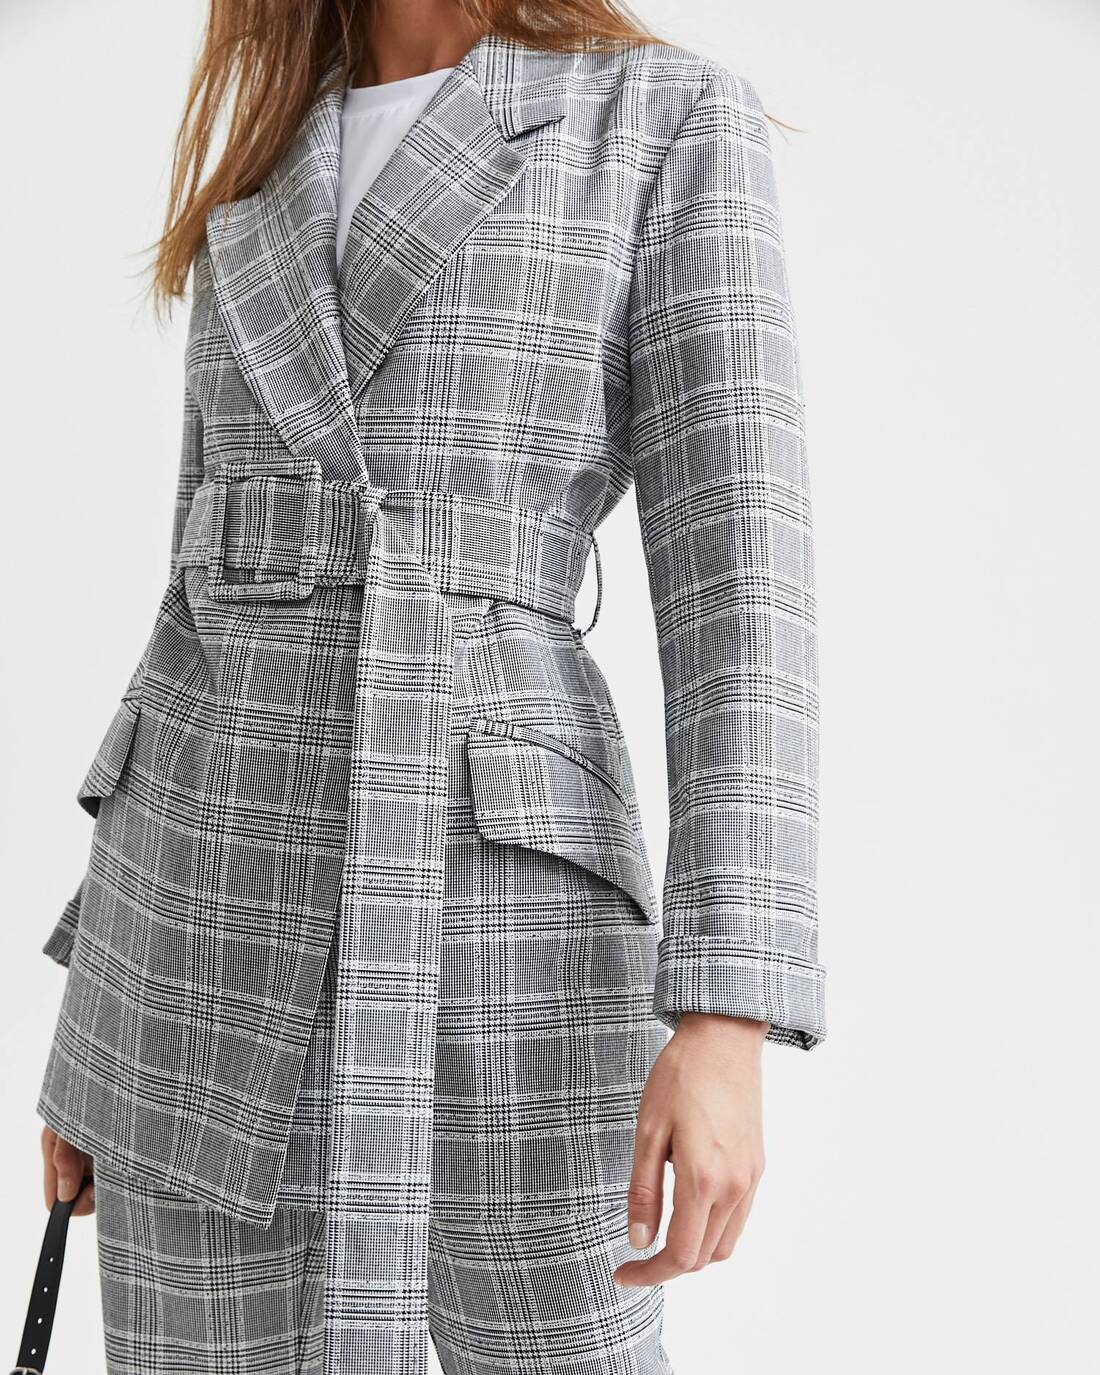 Belted two-piece suit